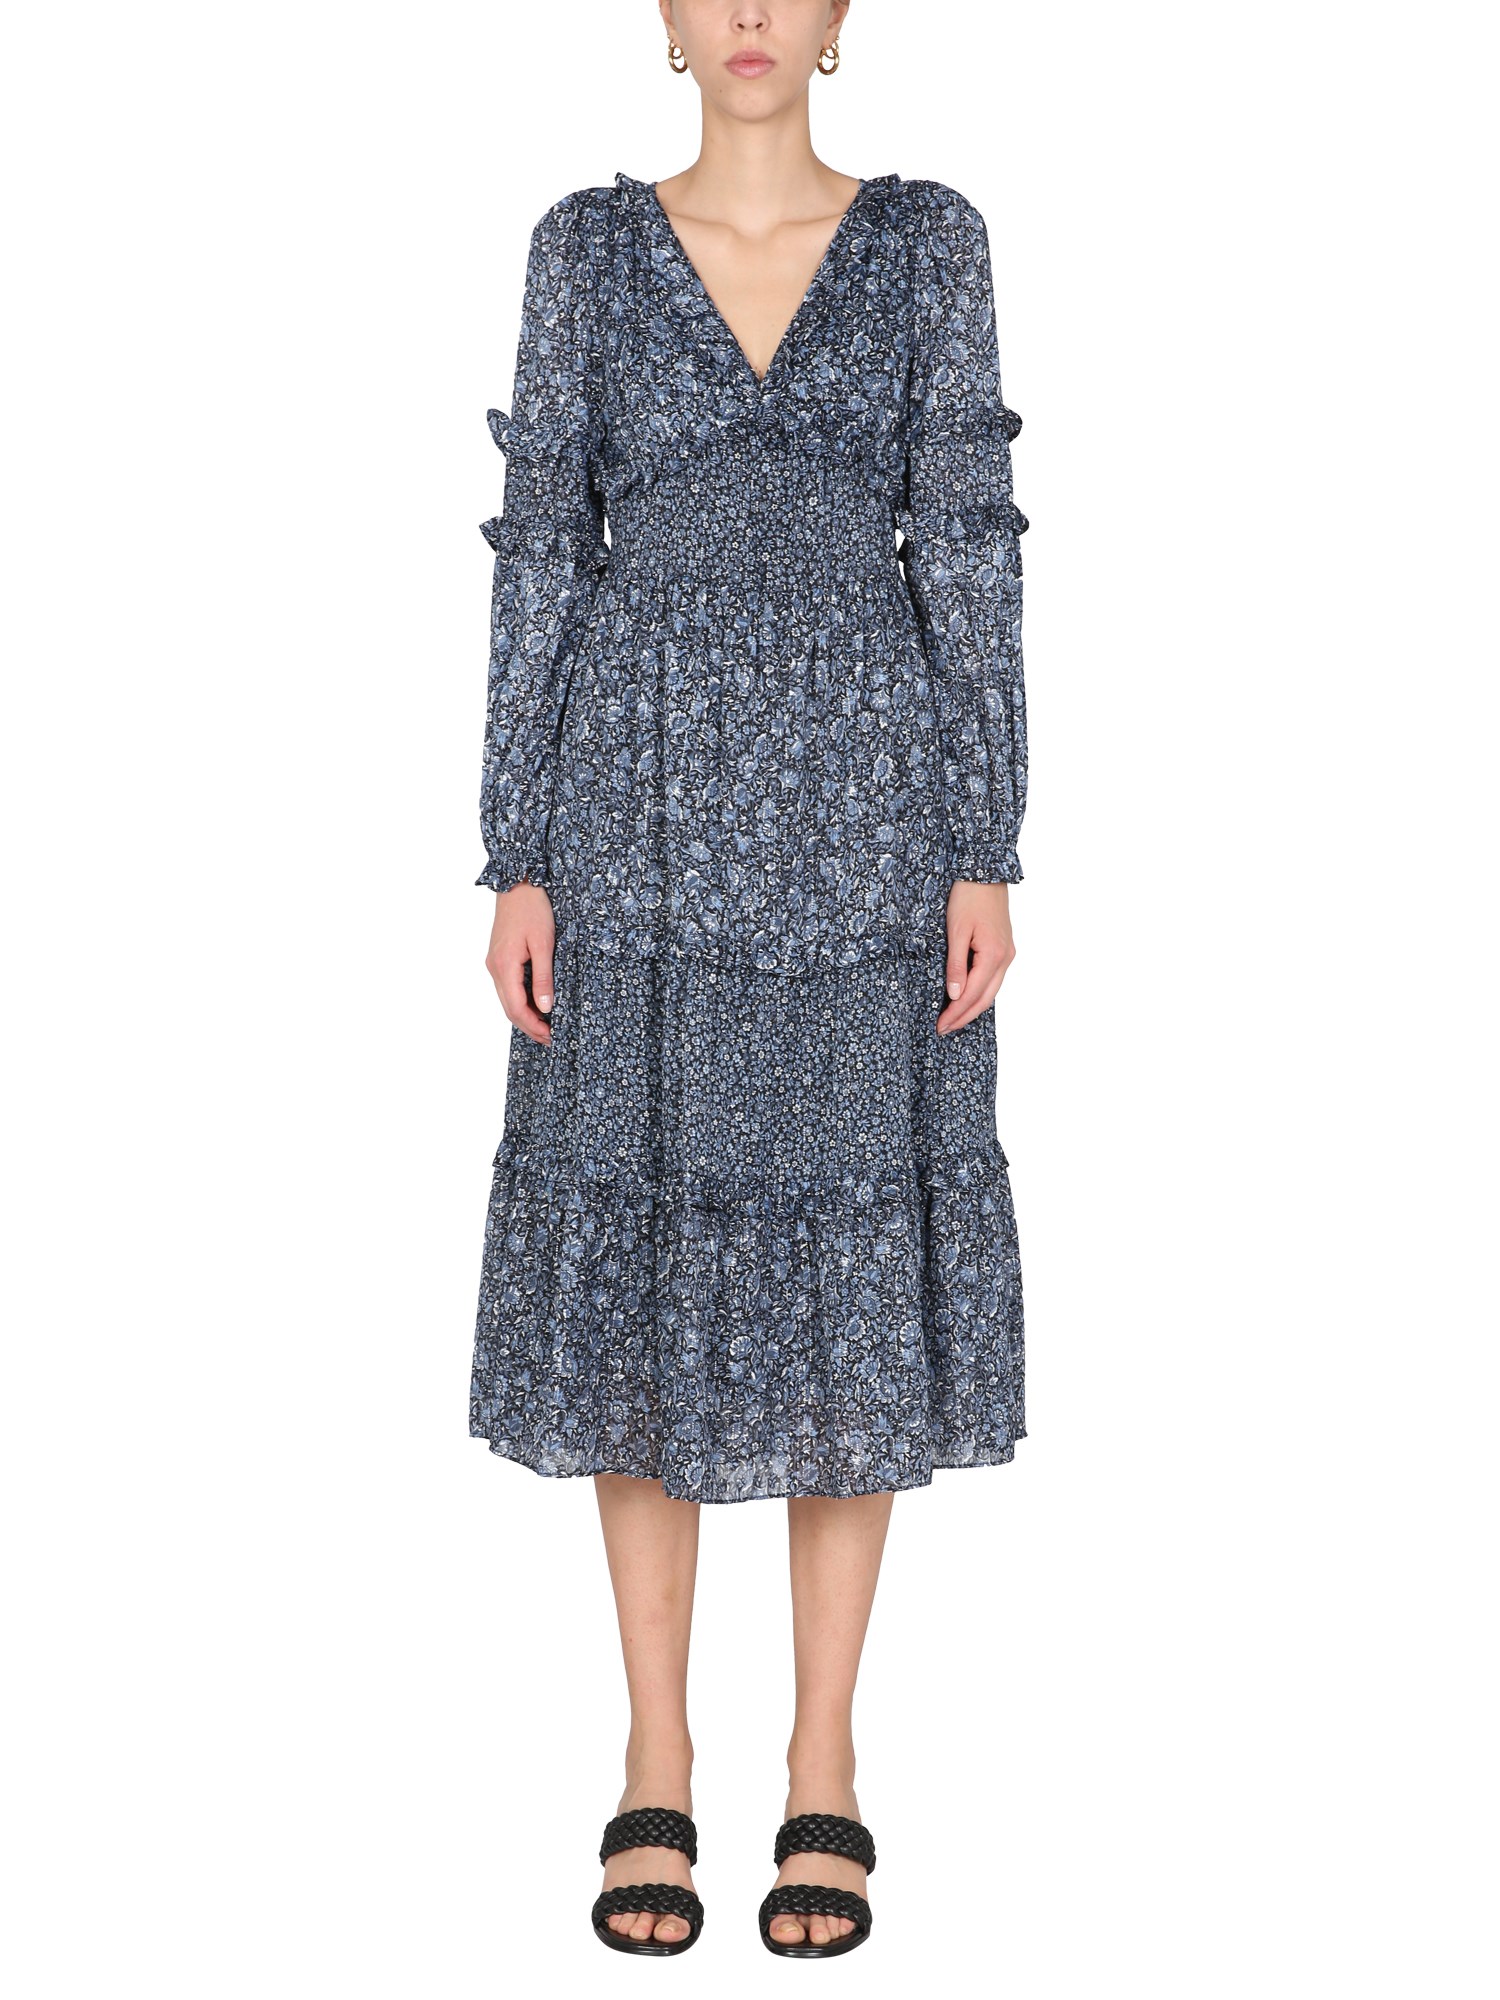 michael by michael kors dress with floral print